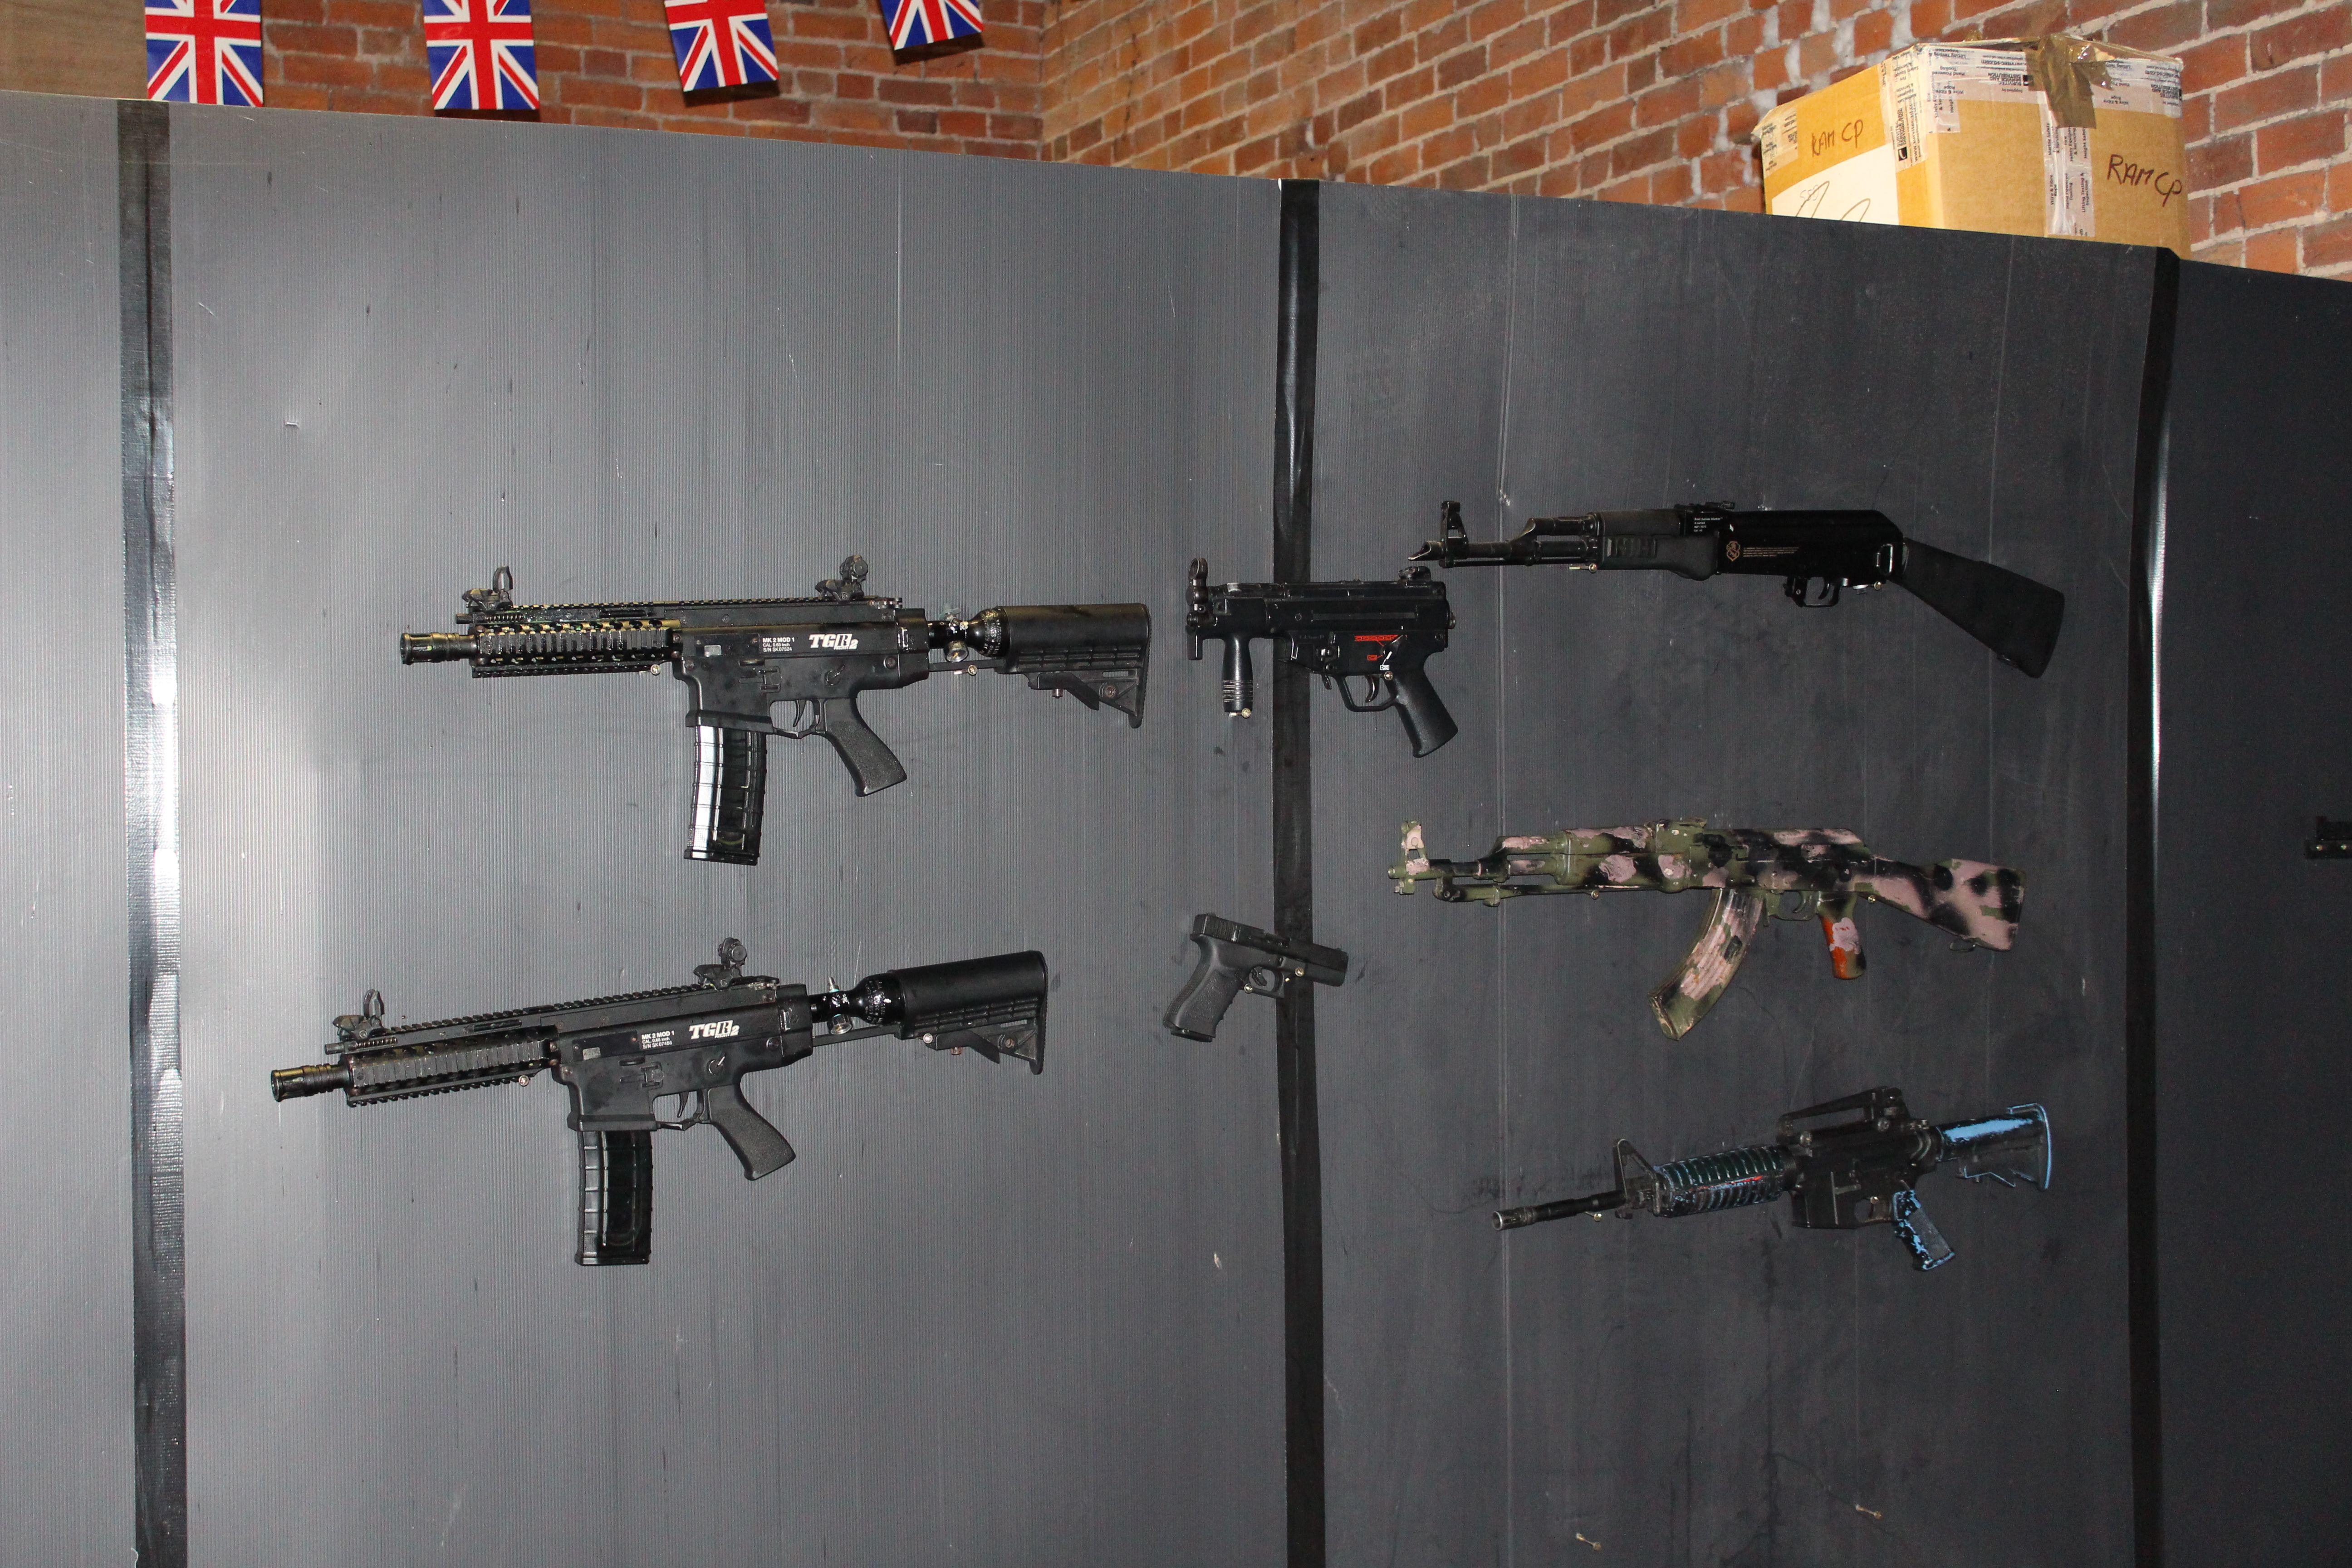 Guns line the wall of a private military company training centre in Hereford. Image by Matt Kennard. England, 2016.